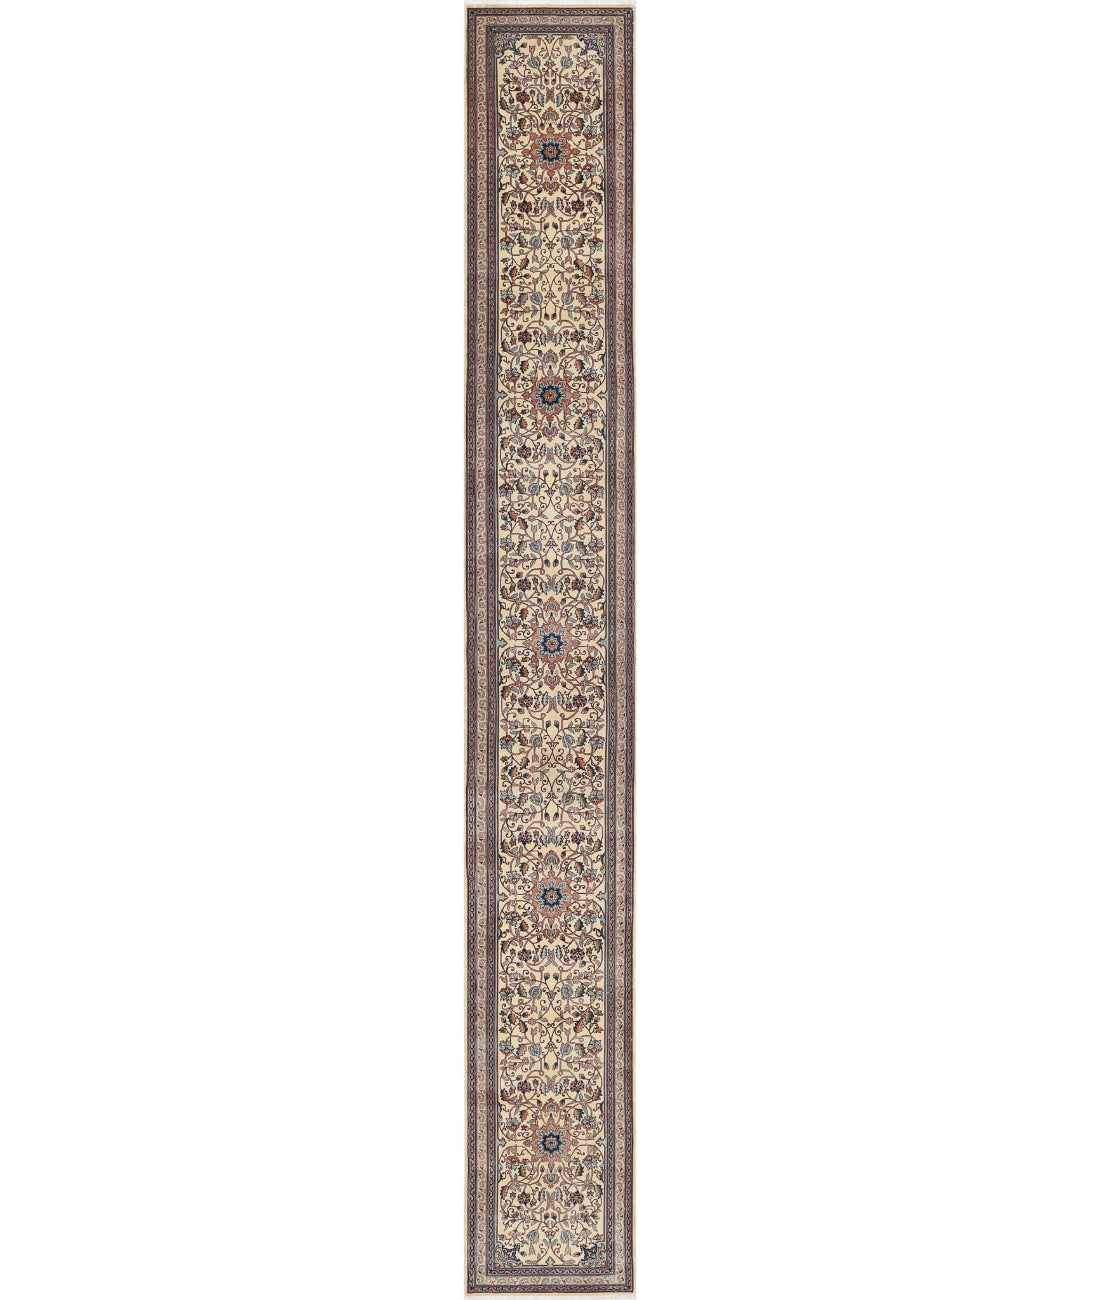 Hand Knotted Heritage Persian Style Wool Rug - 2&#39;6&#39;&#39; x 19&#39;10&#39;&#39; 2&#39;6&#39;&#39; x 19&#39;10&#39;&#39; (75 X 595) / Beige / Green